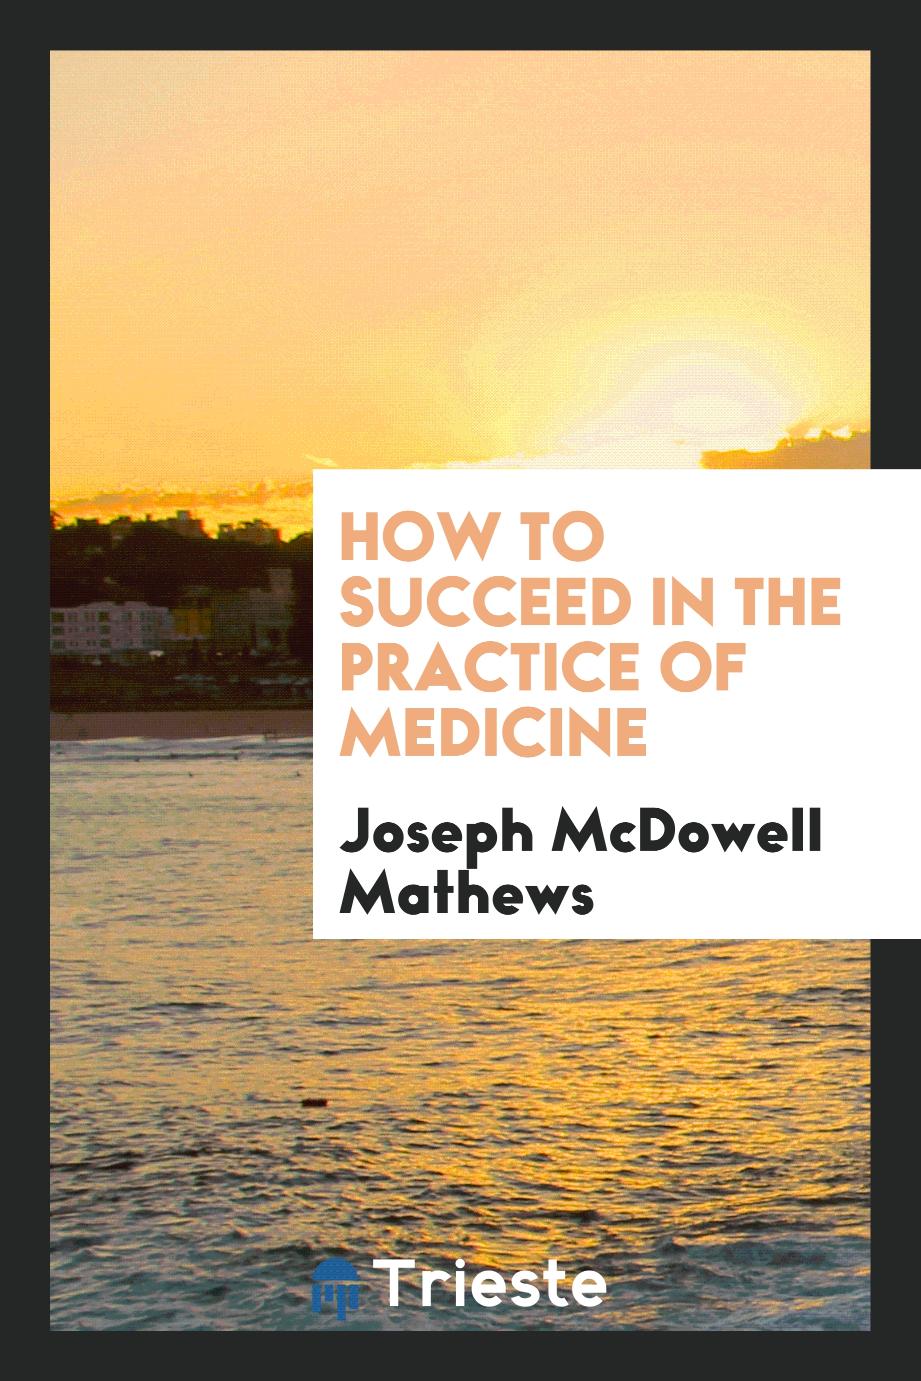 How to succeed in the practice of medicine